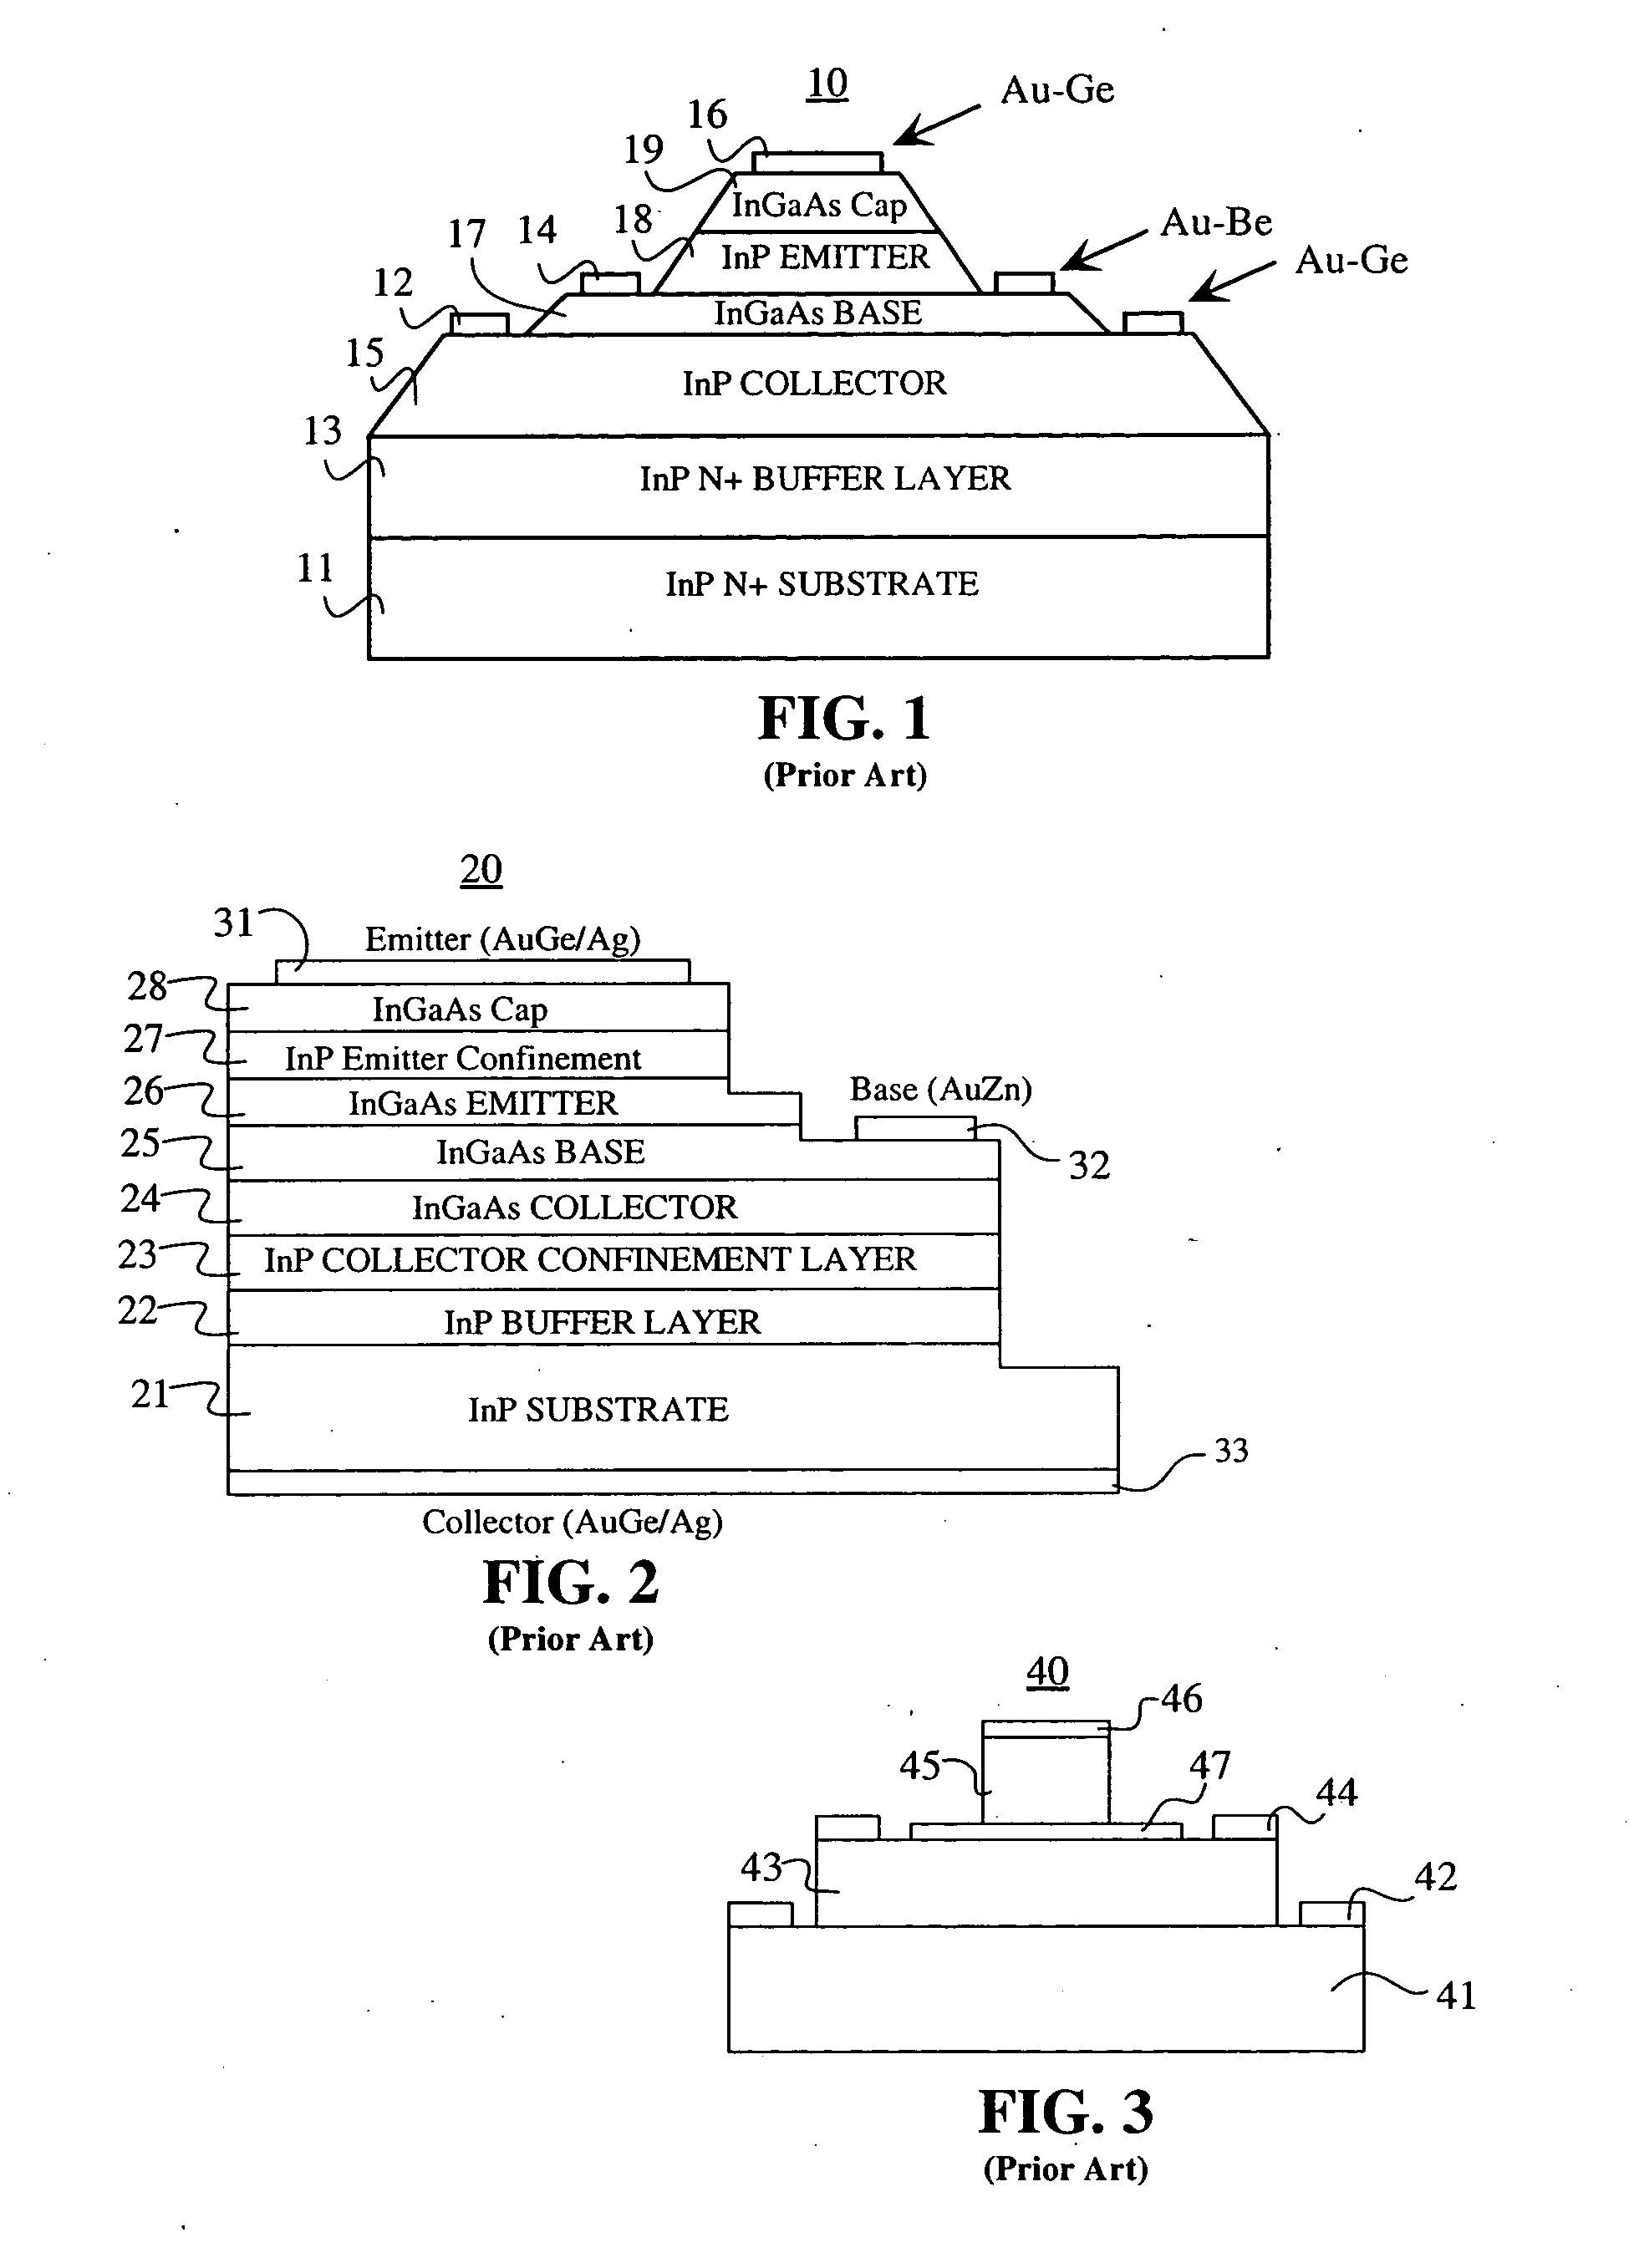 Semiconductor structure for a heterojunction bipolar transistor and a method of making same